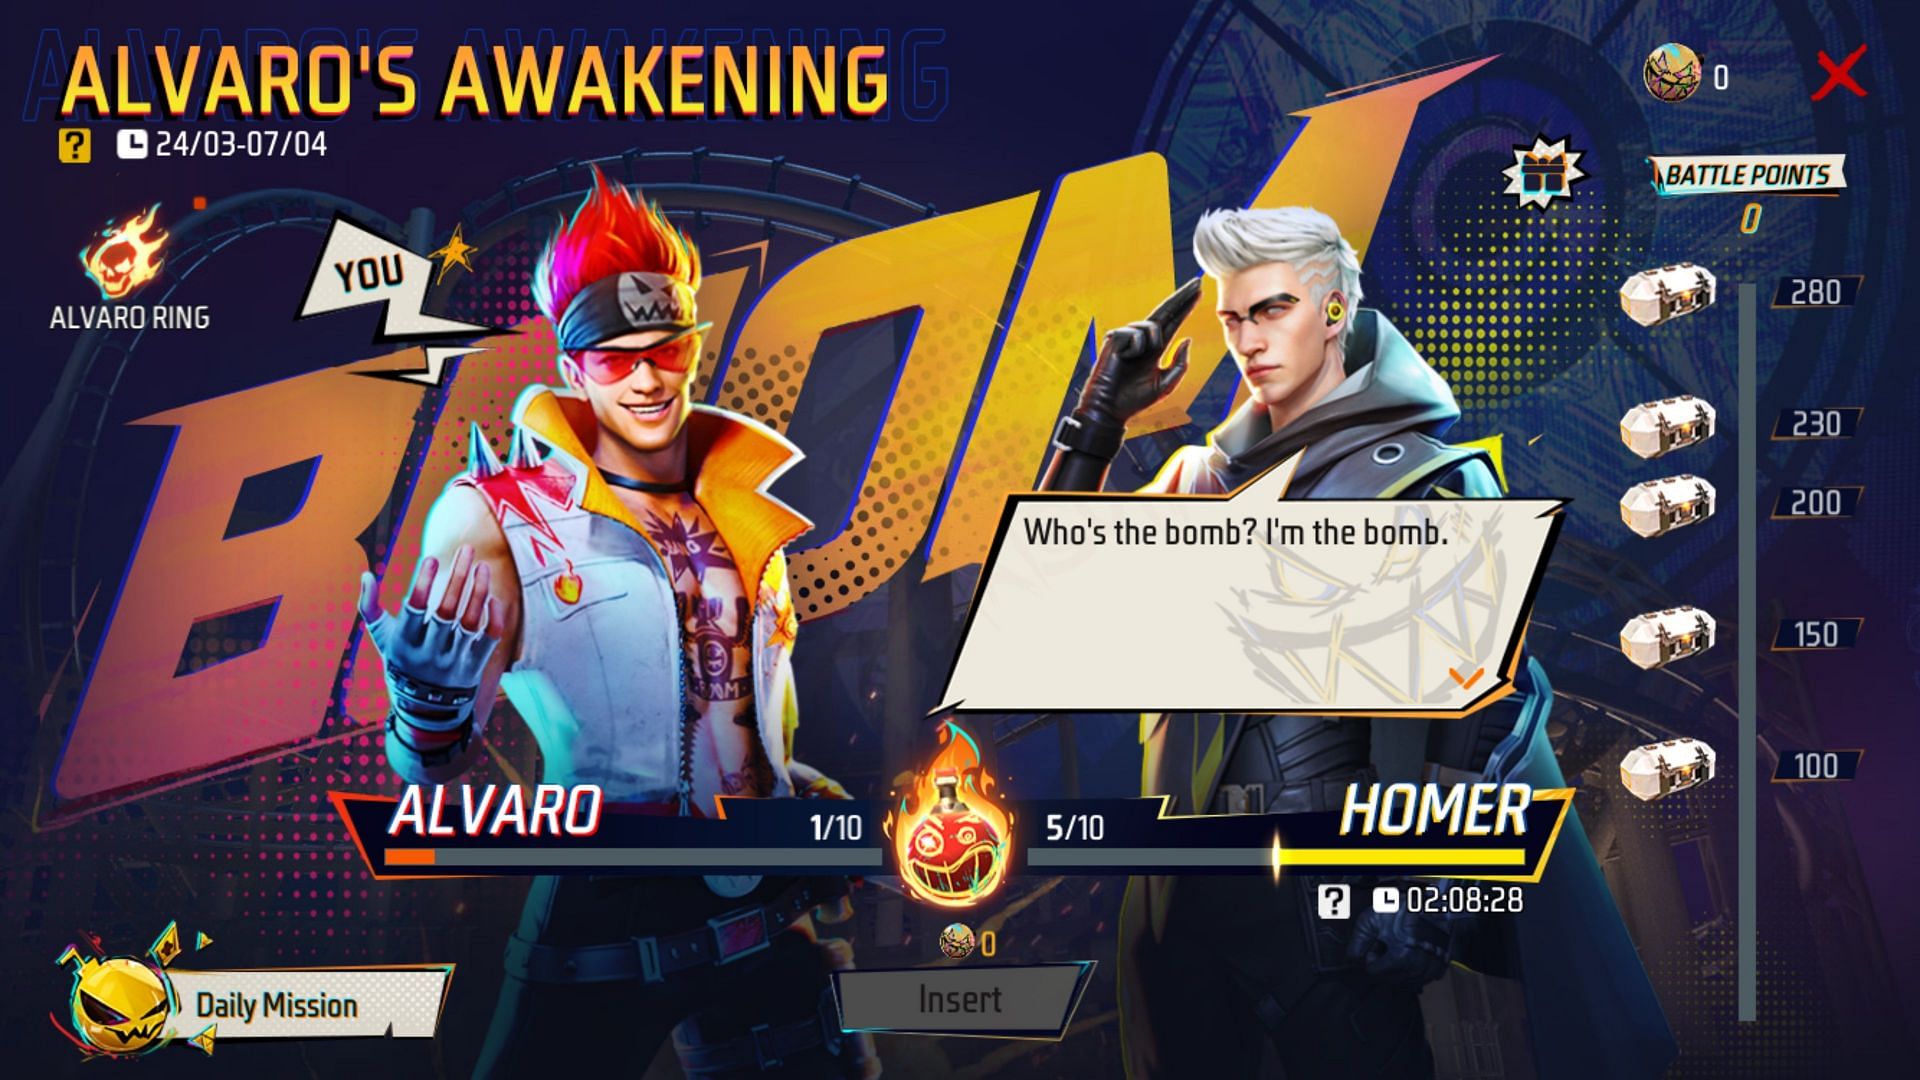 The new event interface in Free Fire MAX (Image via Garena)